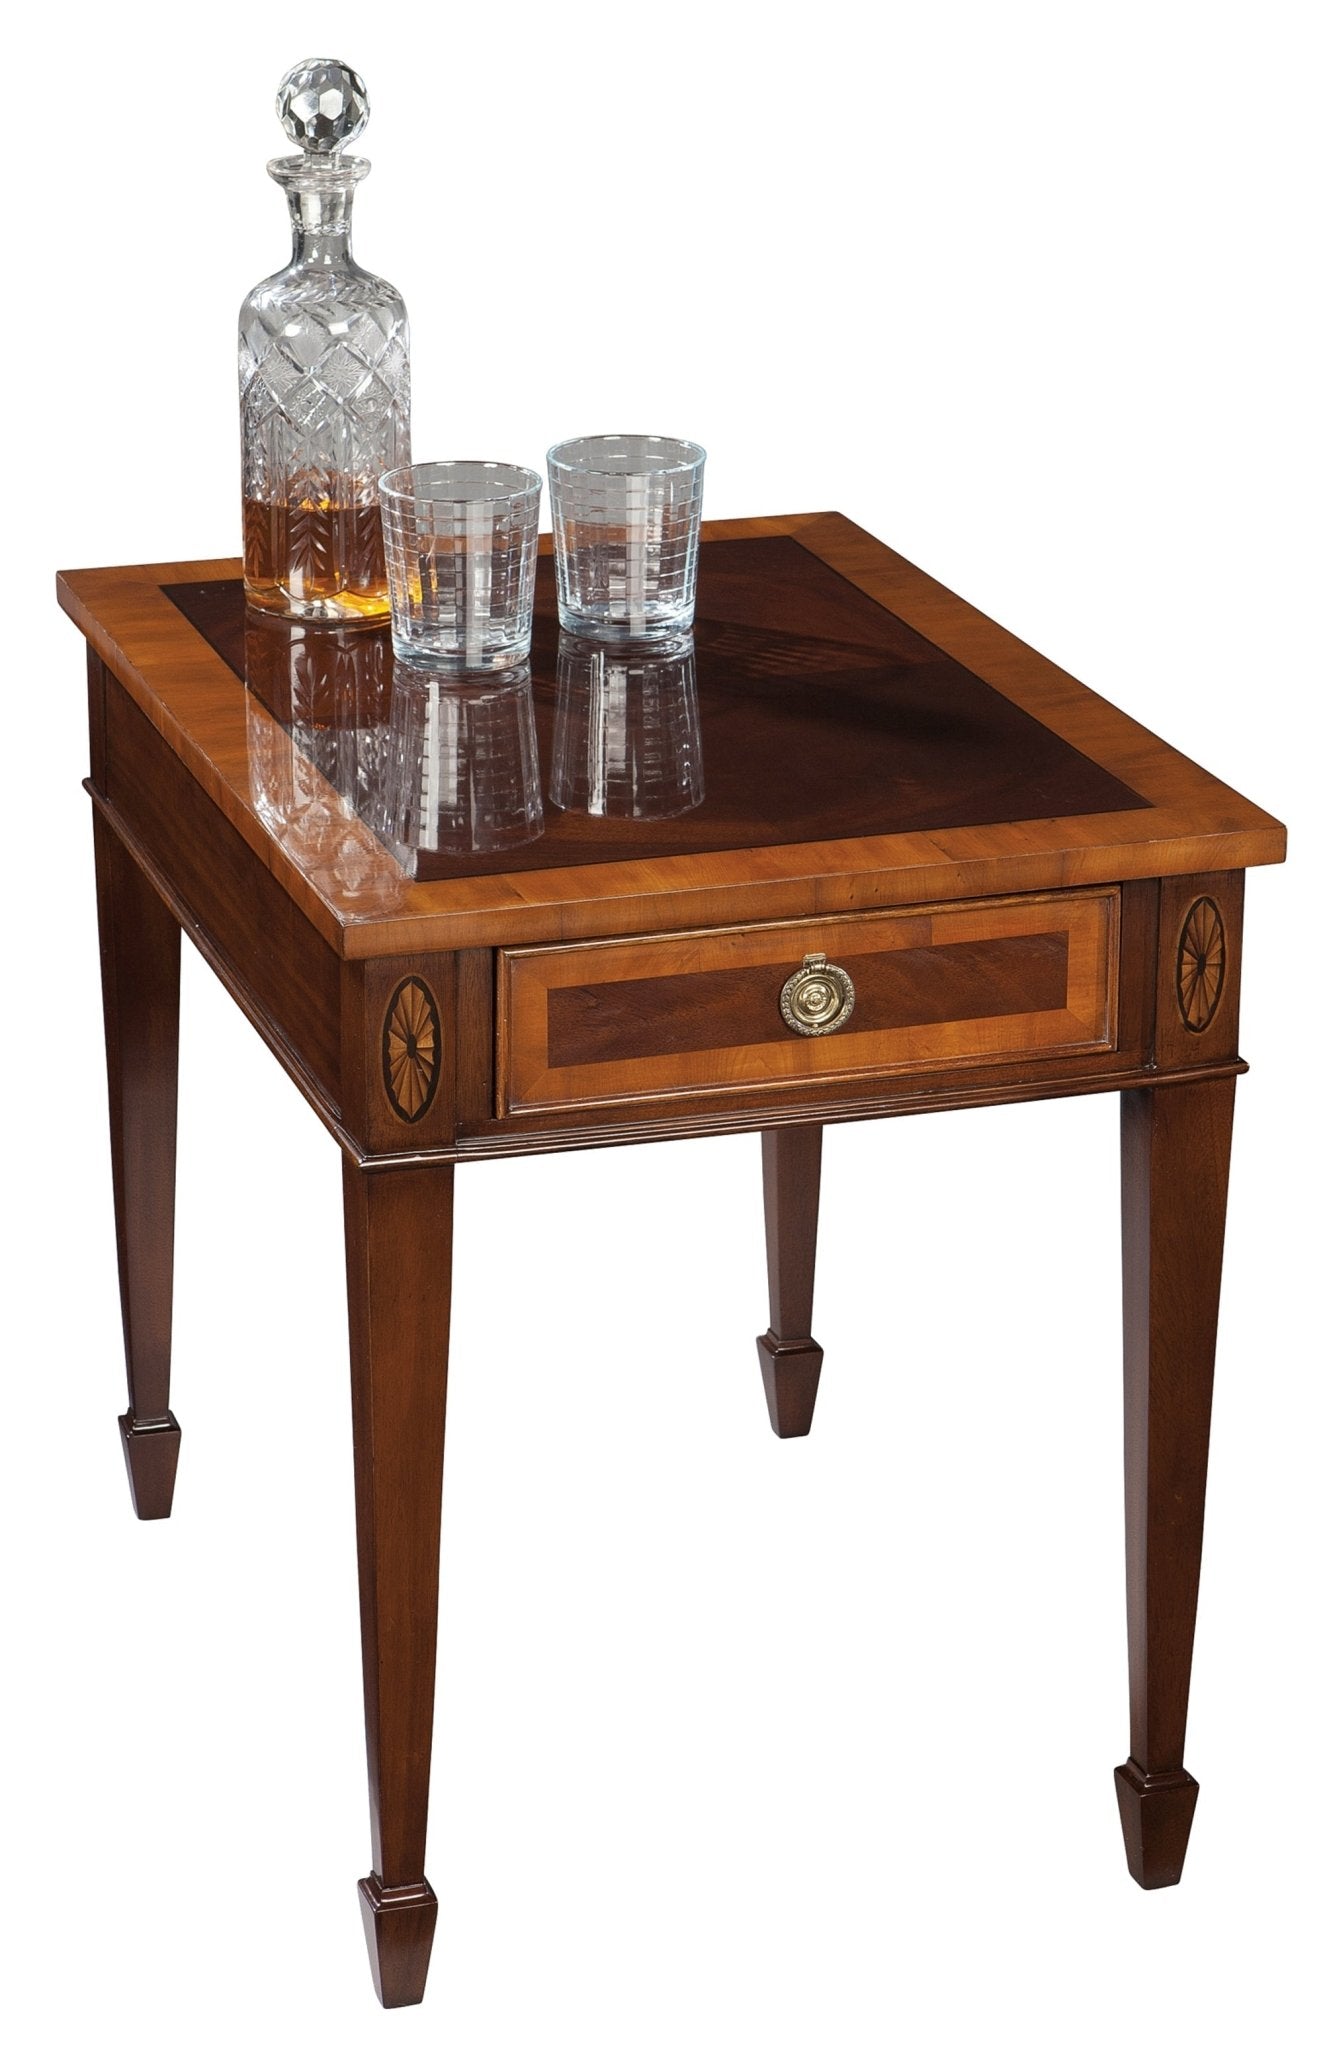 Copley Place Rectangular End Table - Furniture - Tipplergoods